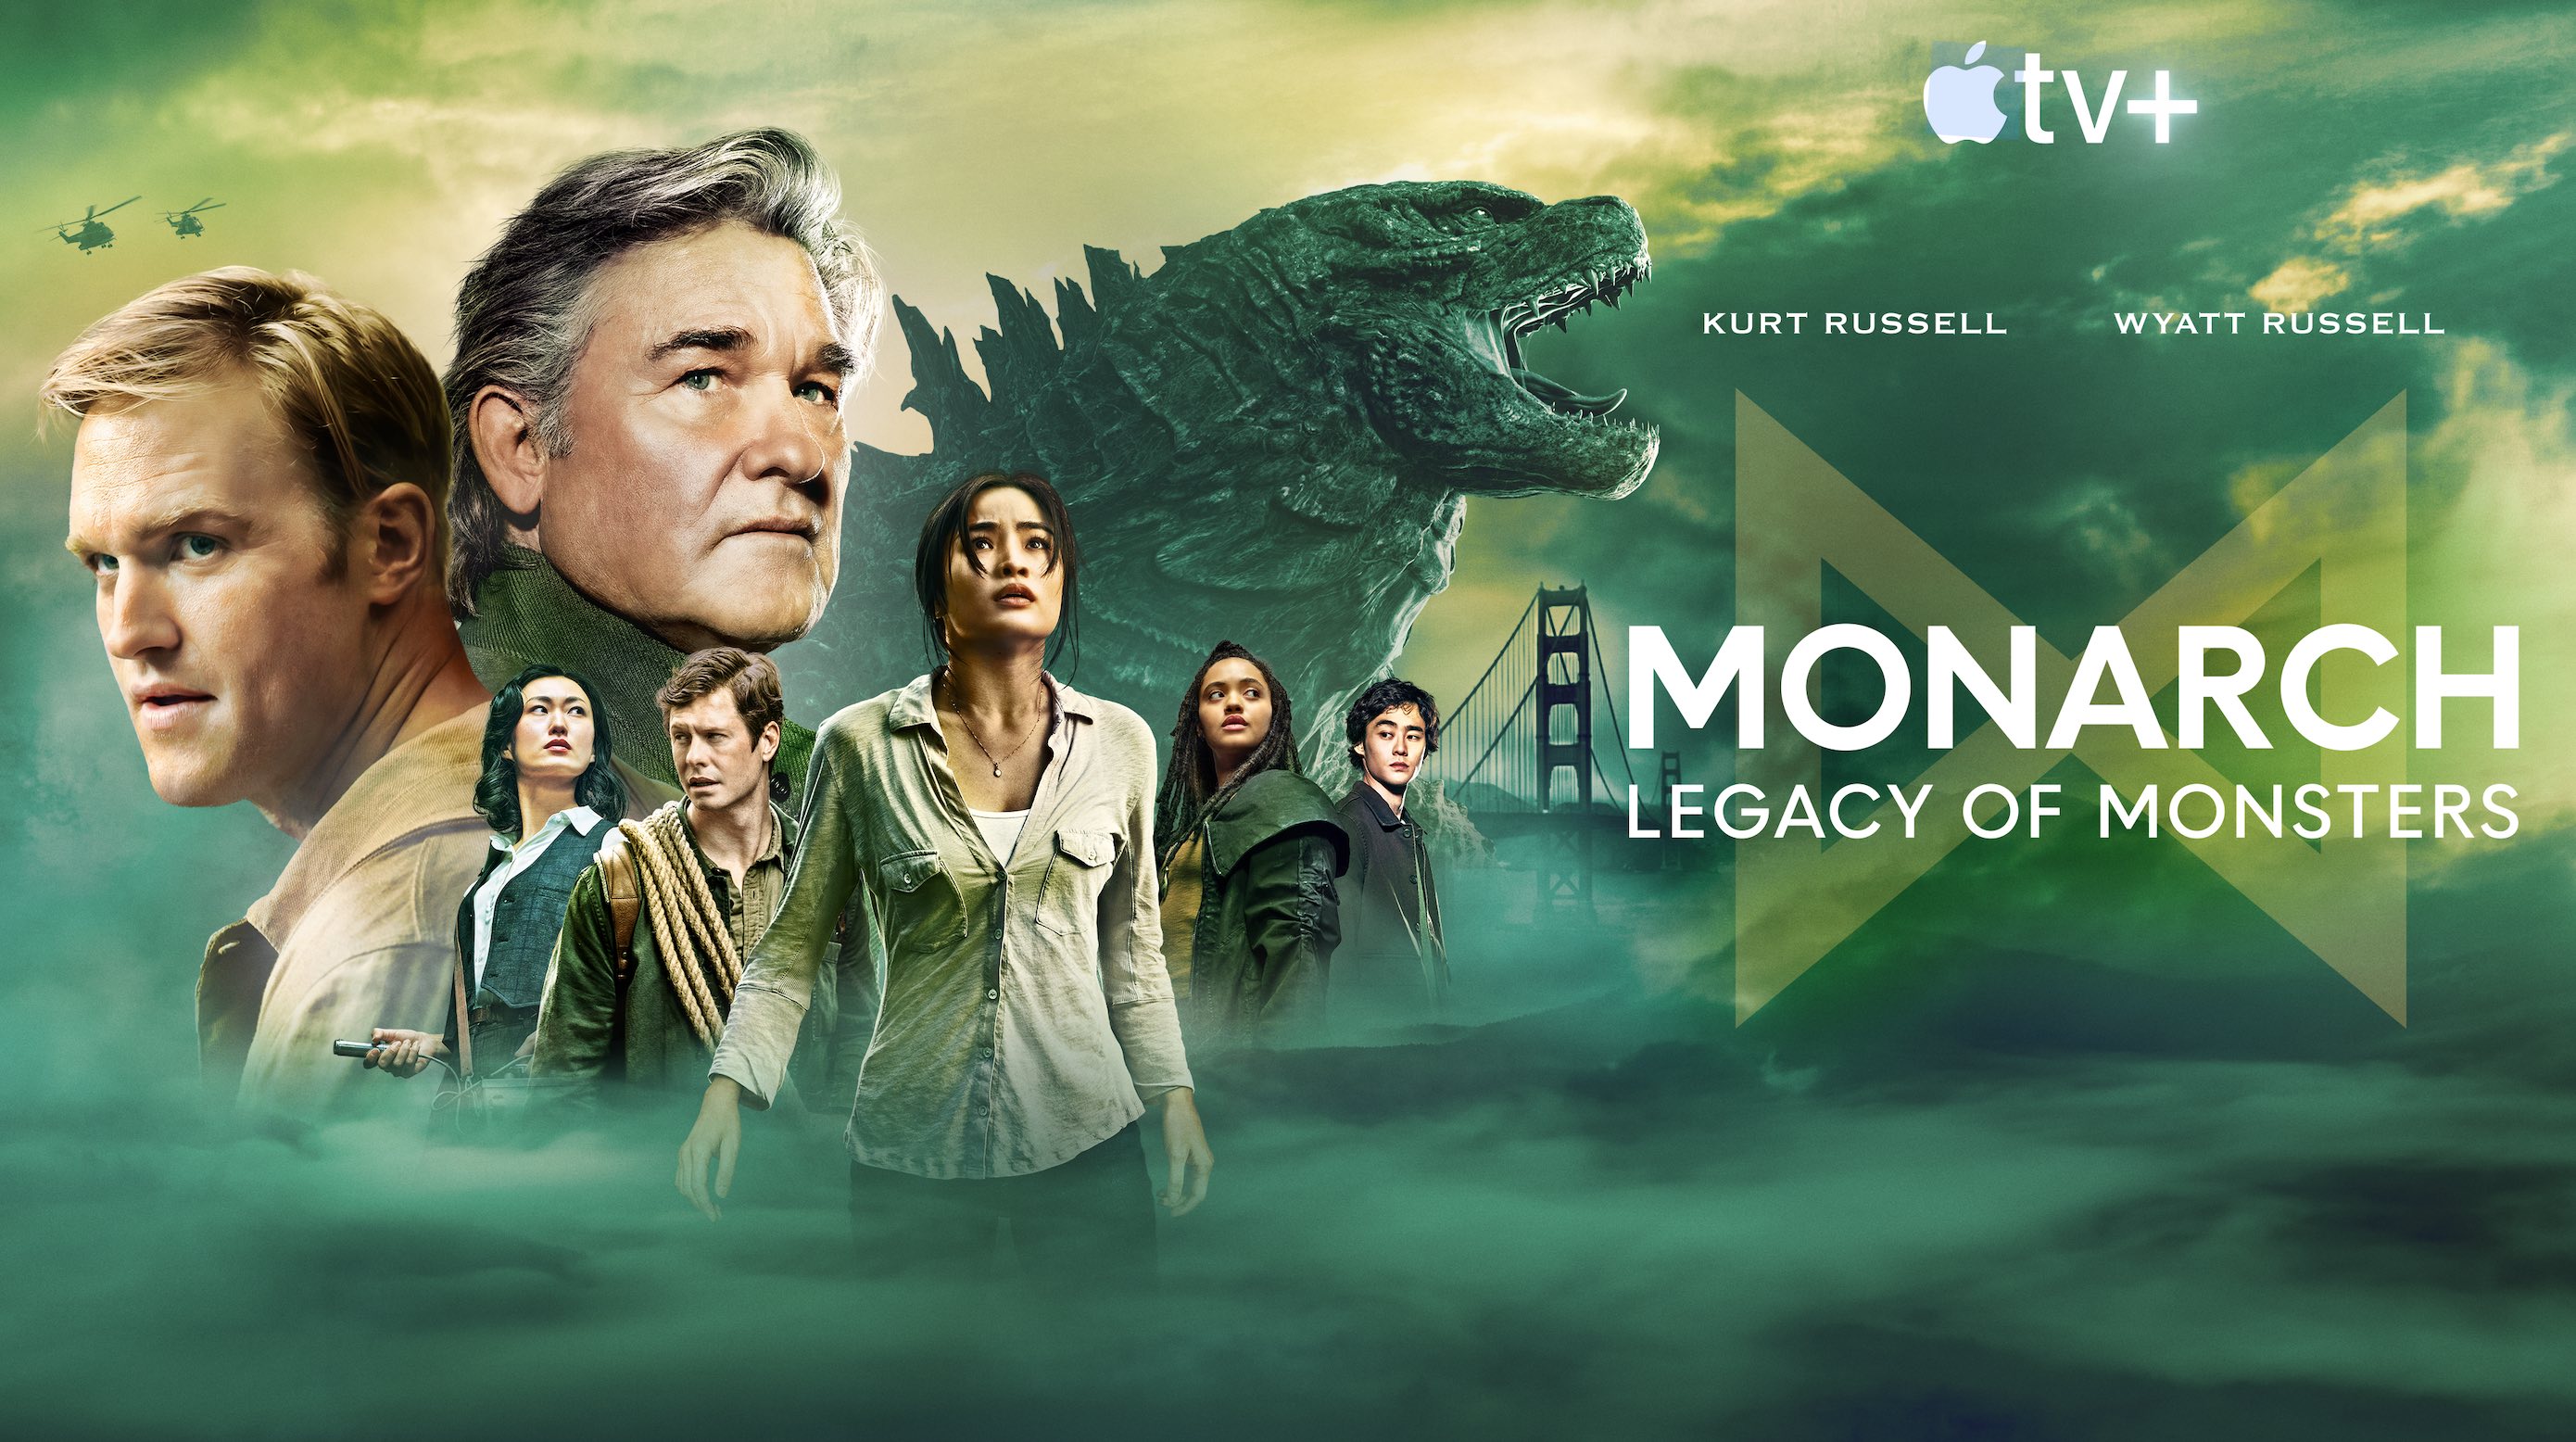 Monarch: Legacy of Monsters Cast - Every Actor and Character in the Apple TV+ Series